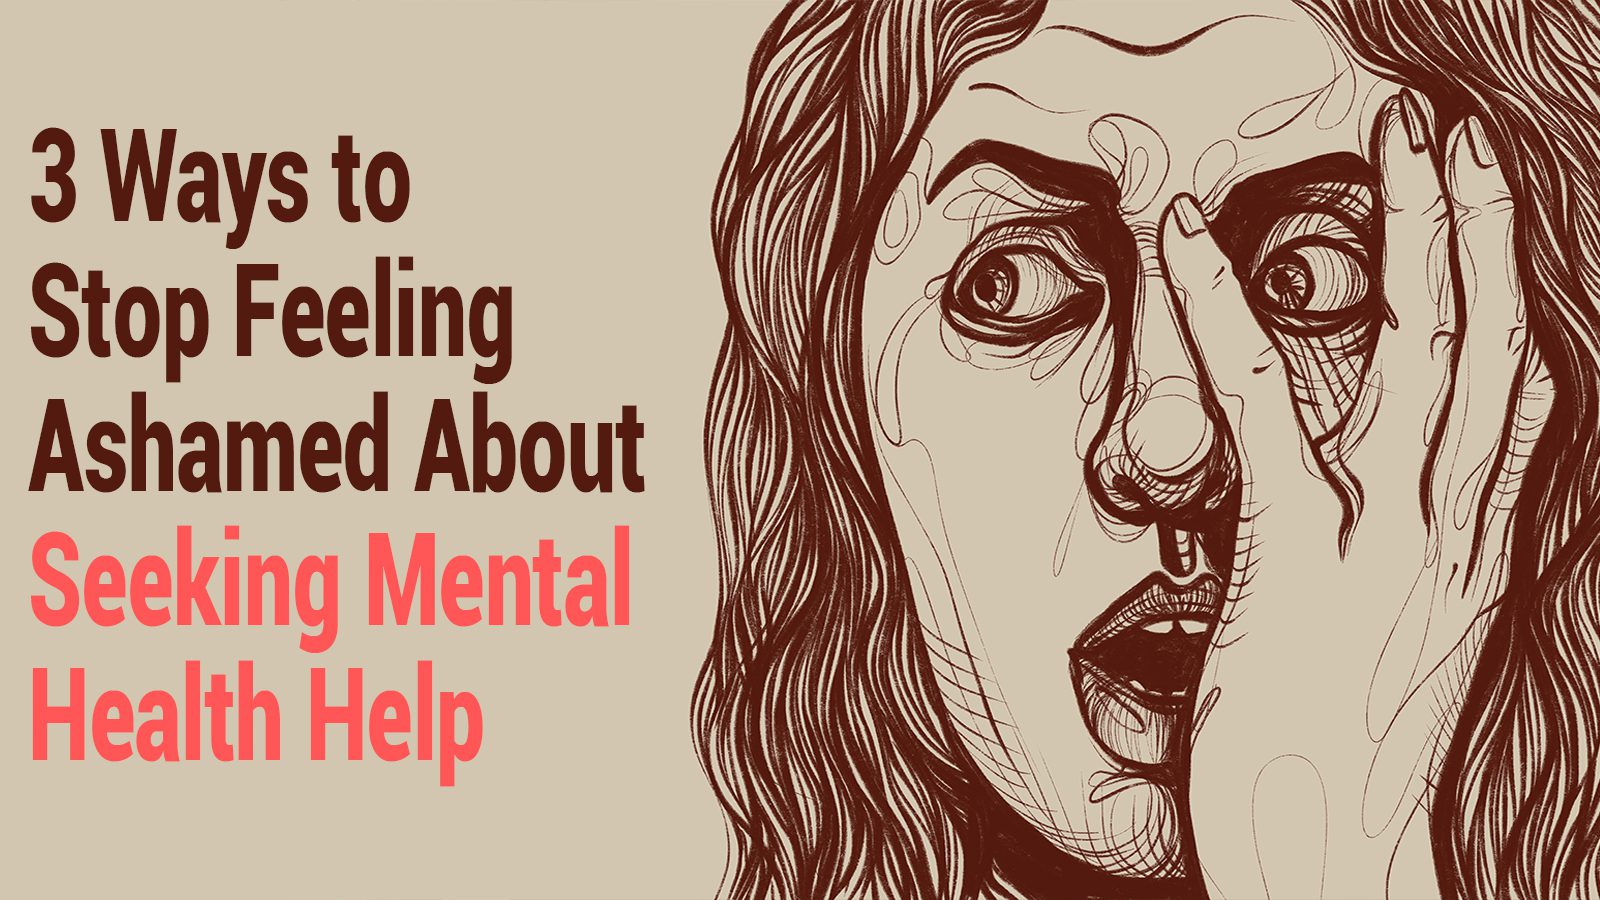 Stop Feeling Ashamed About Getting Mental Health Help